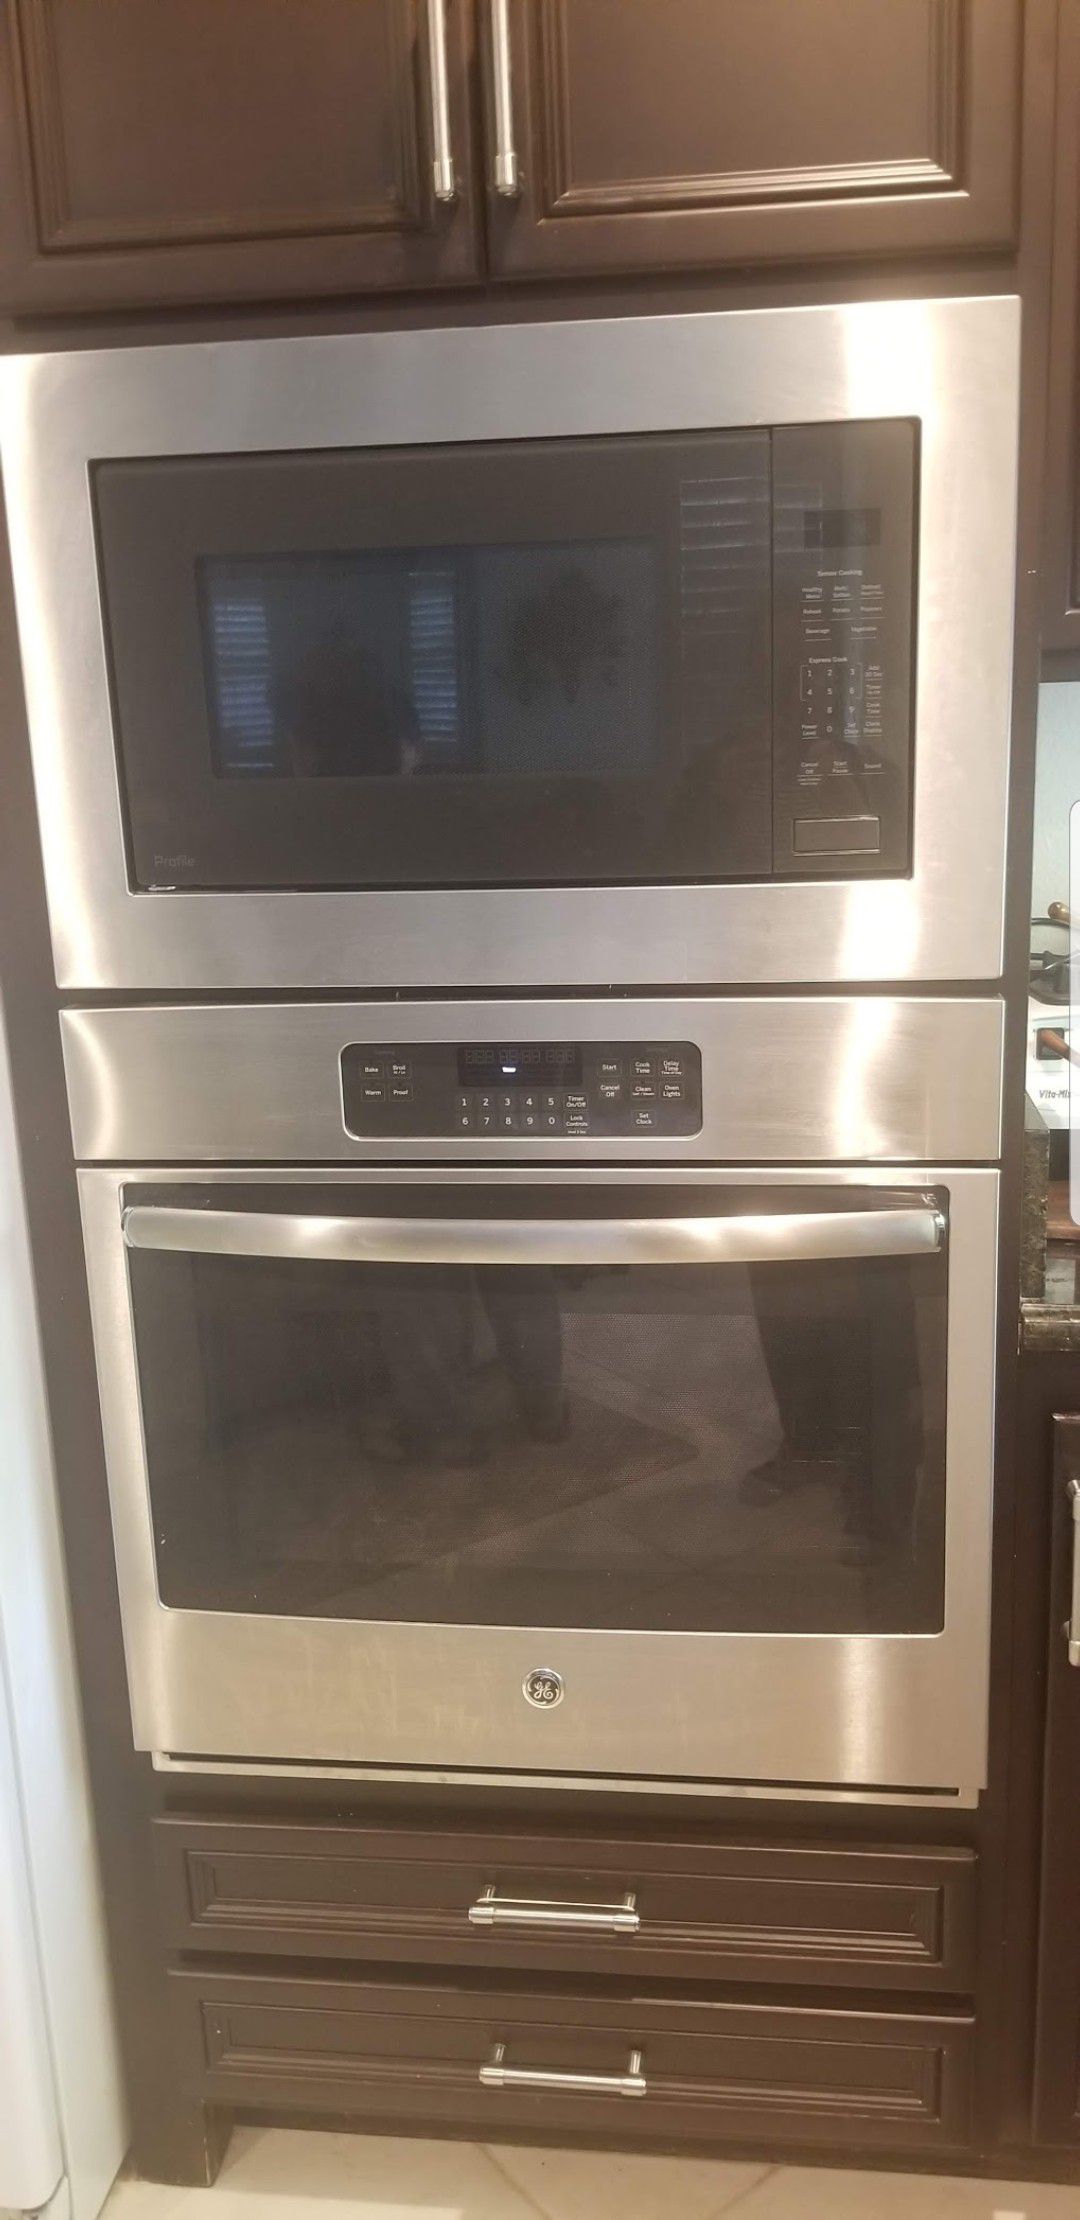 GE Profile Series 2.2 Cu. Ft. Built in Sensor Microwave Oven and GE Electric Wall Ovens Self Cleaning with Steam + Range Hood